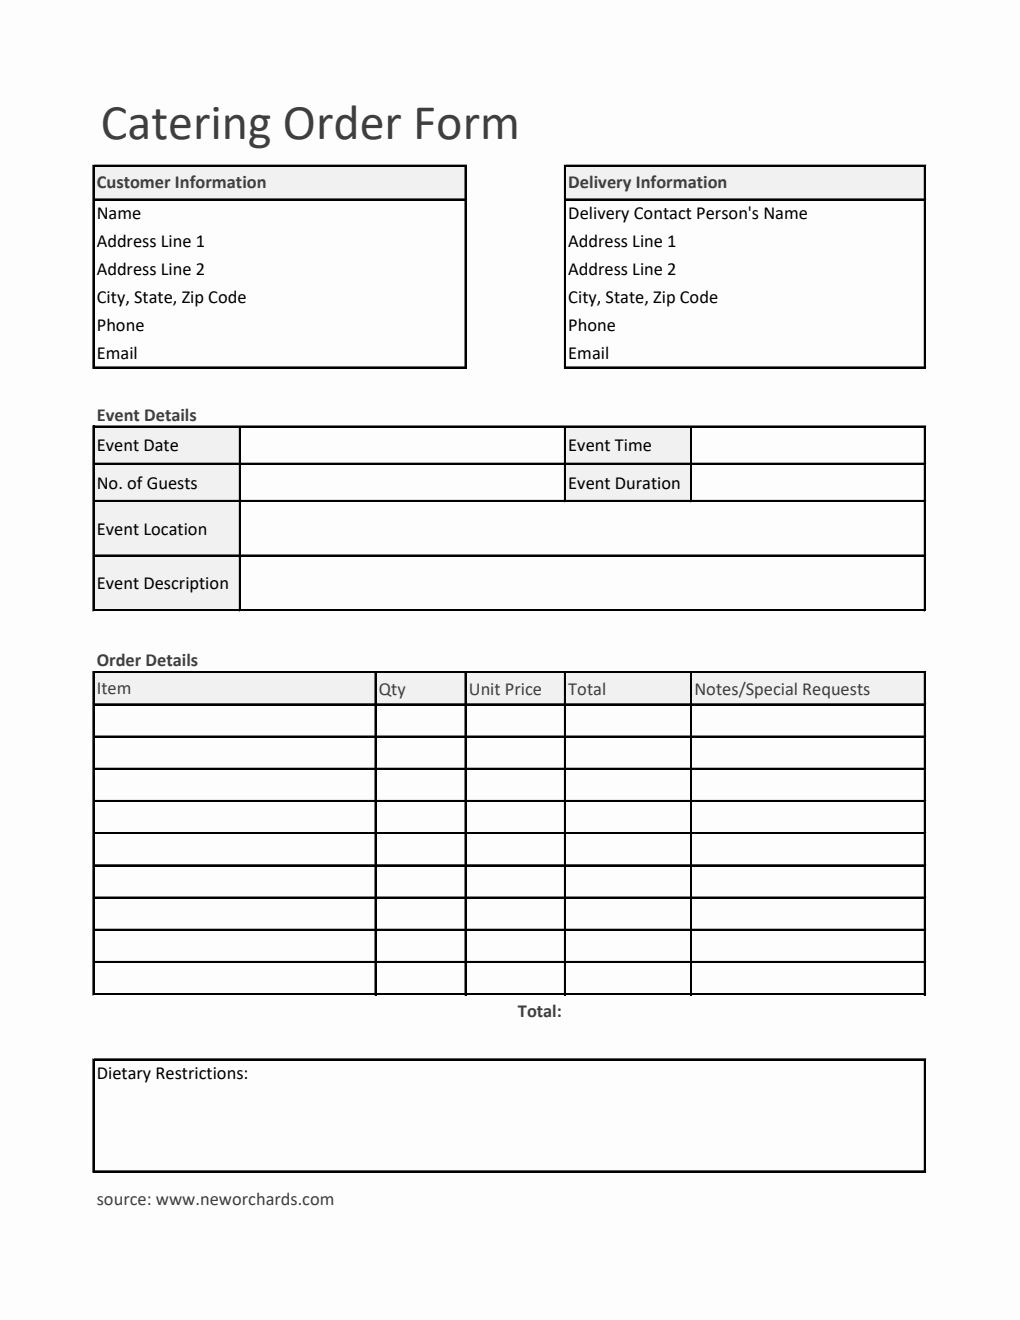 Basic Catering Order Form Template in Excel